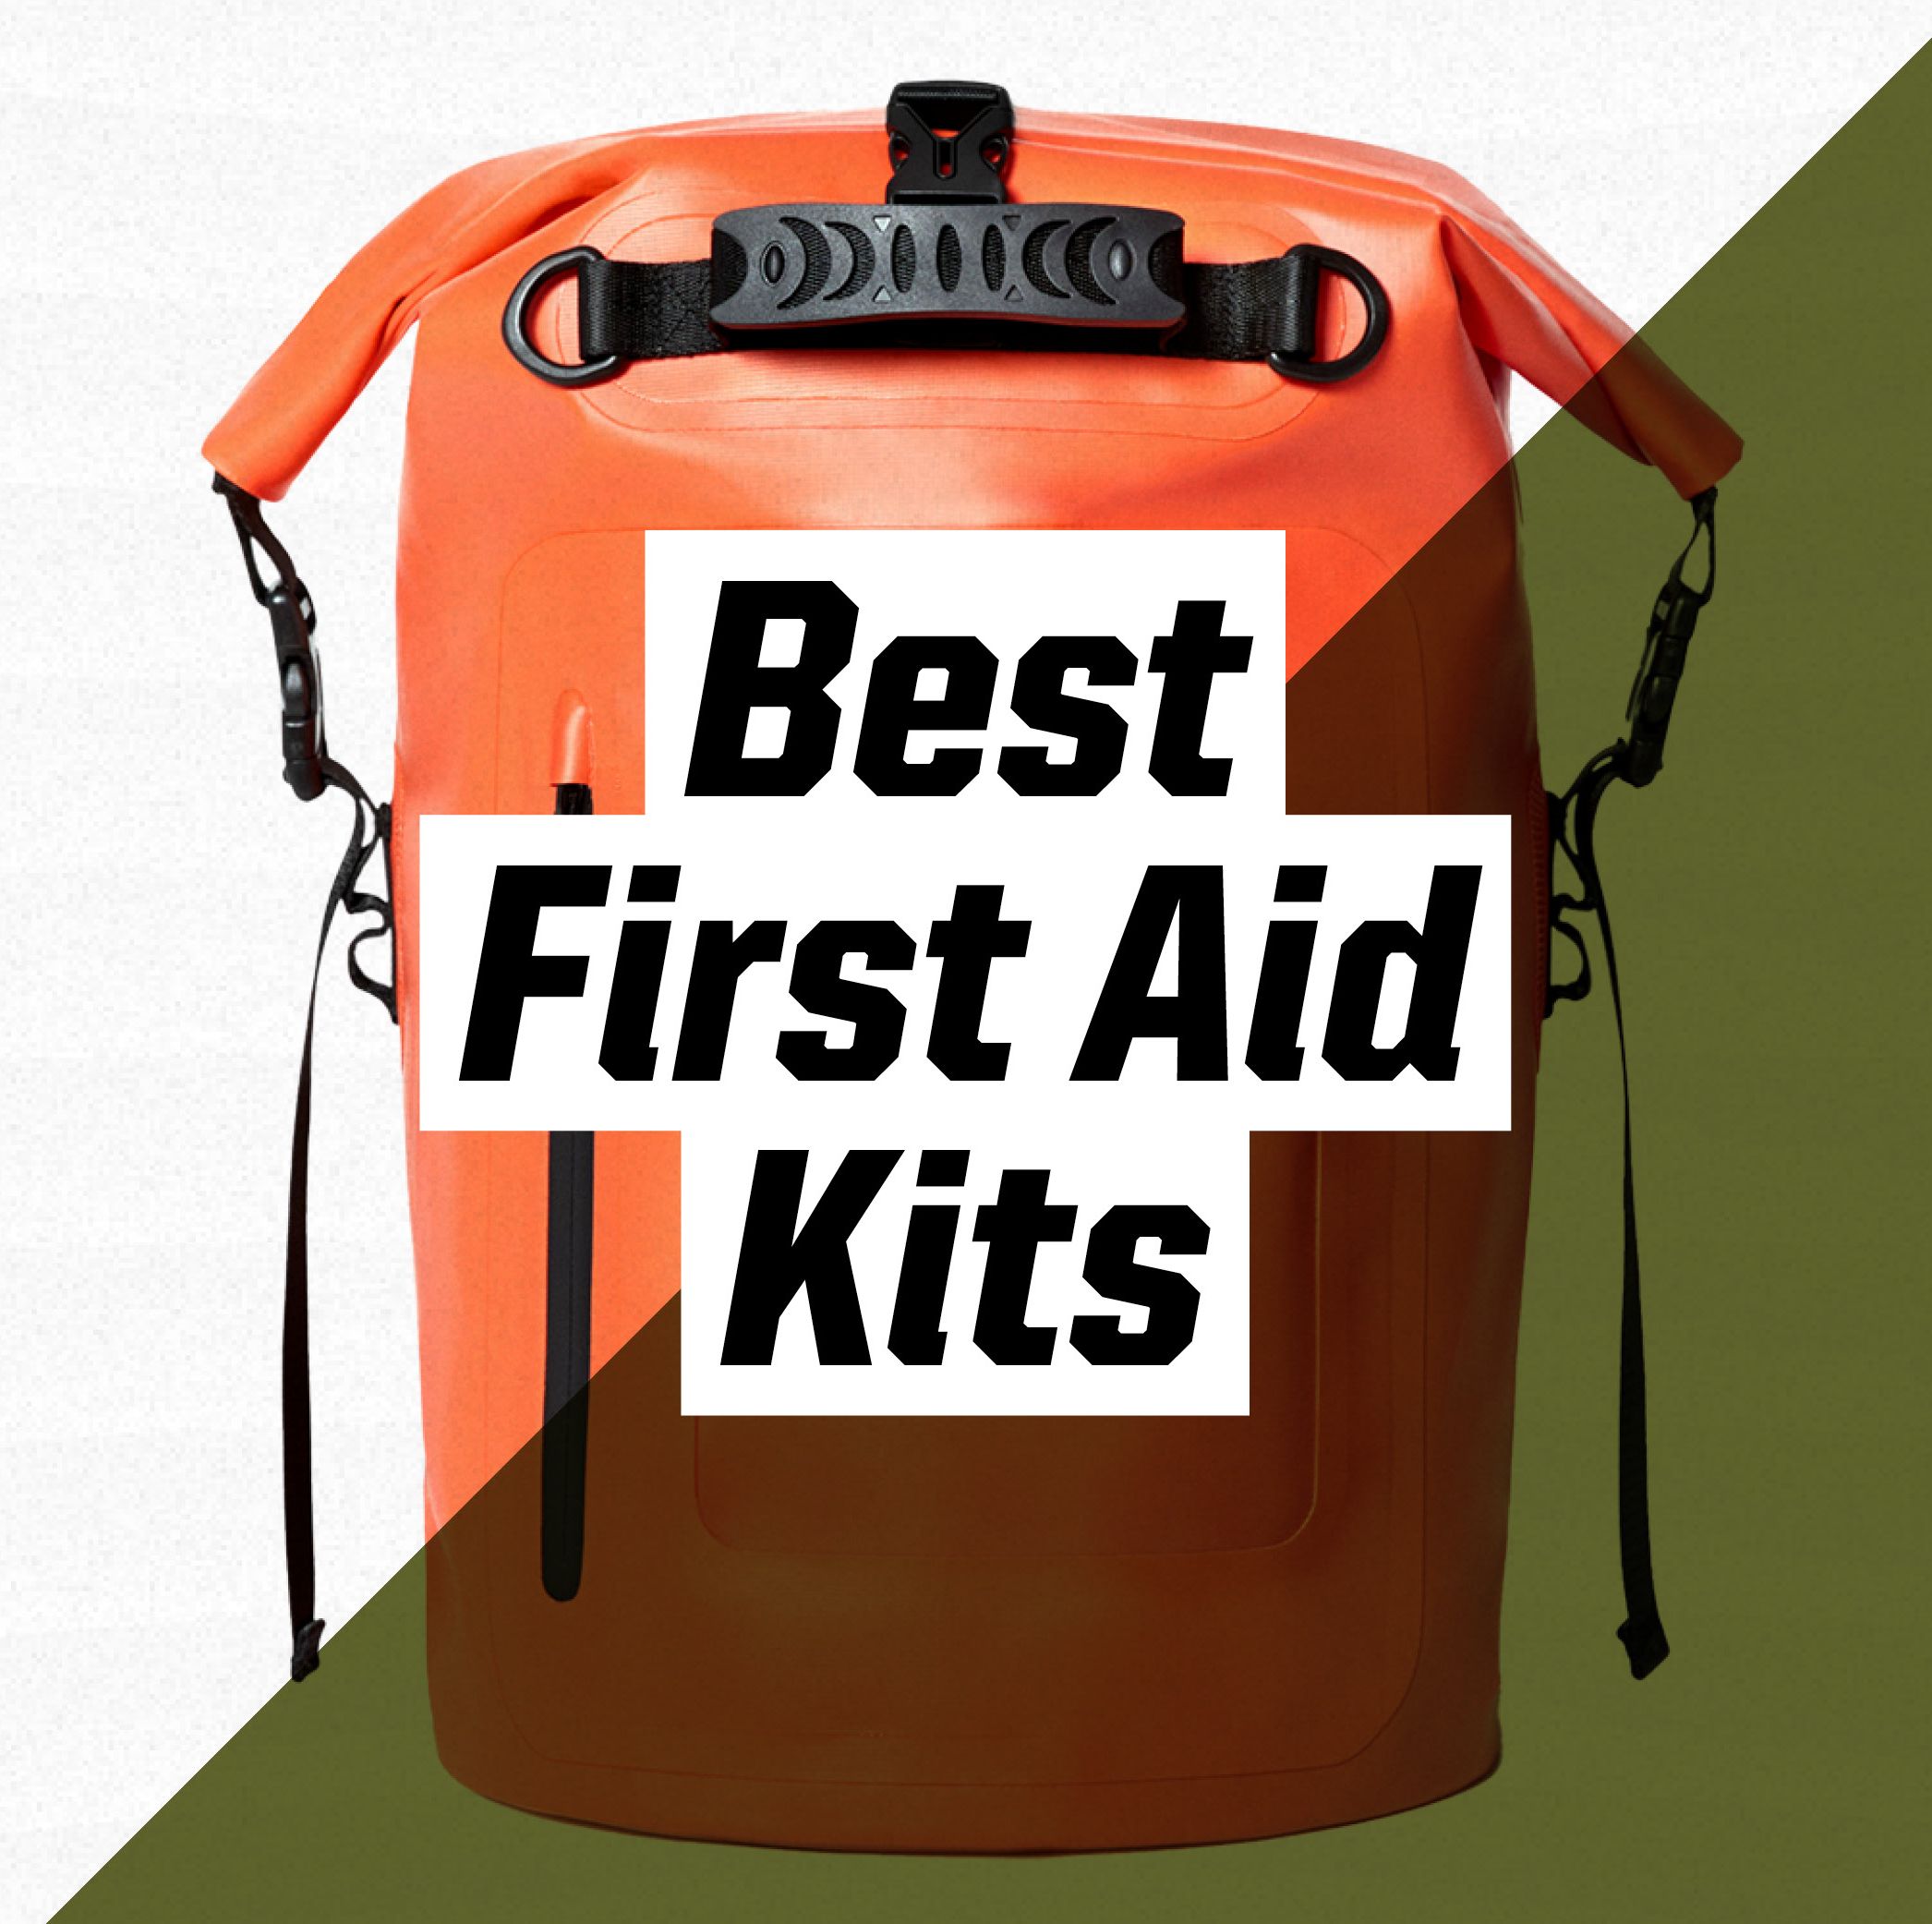 The Best First Aid Kits to Keep on You For Emergencies